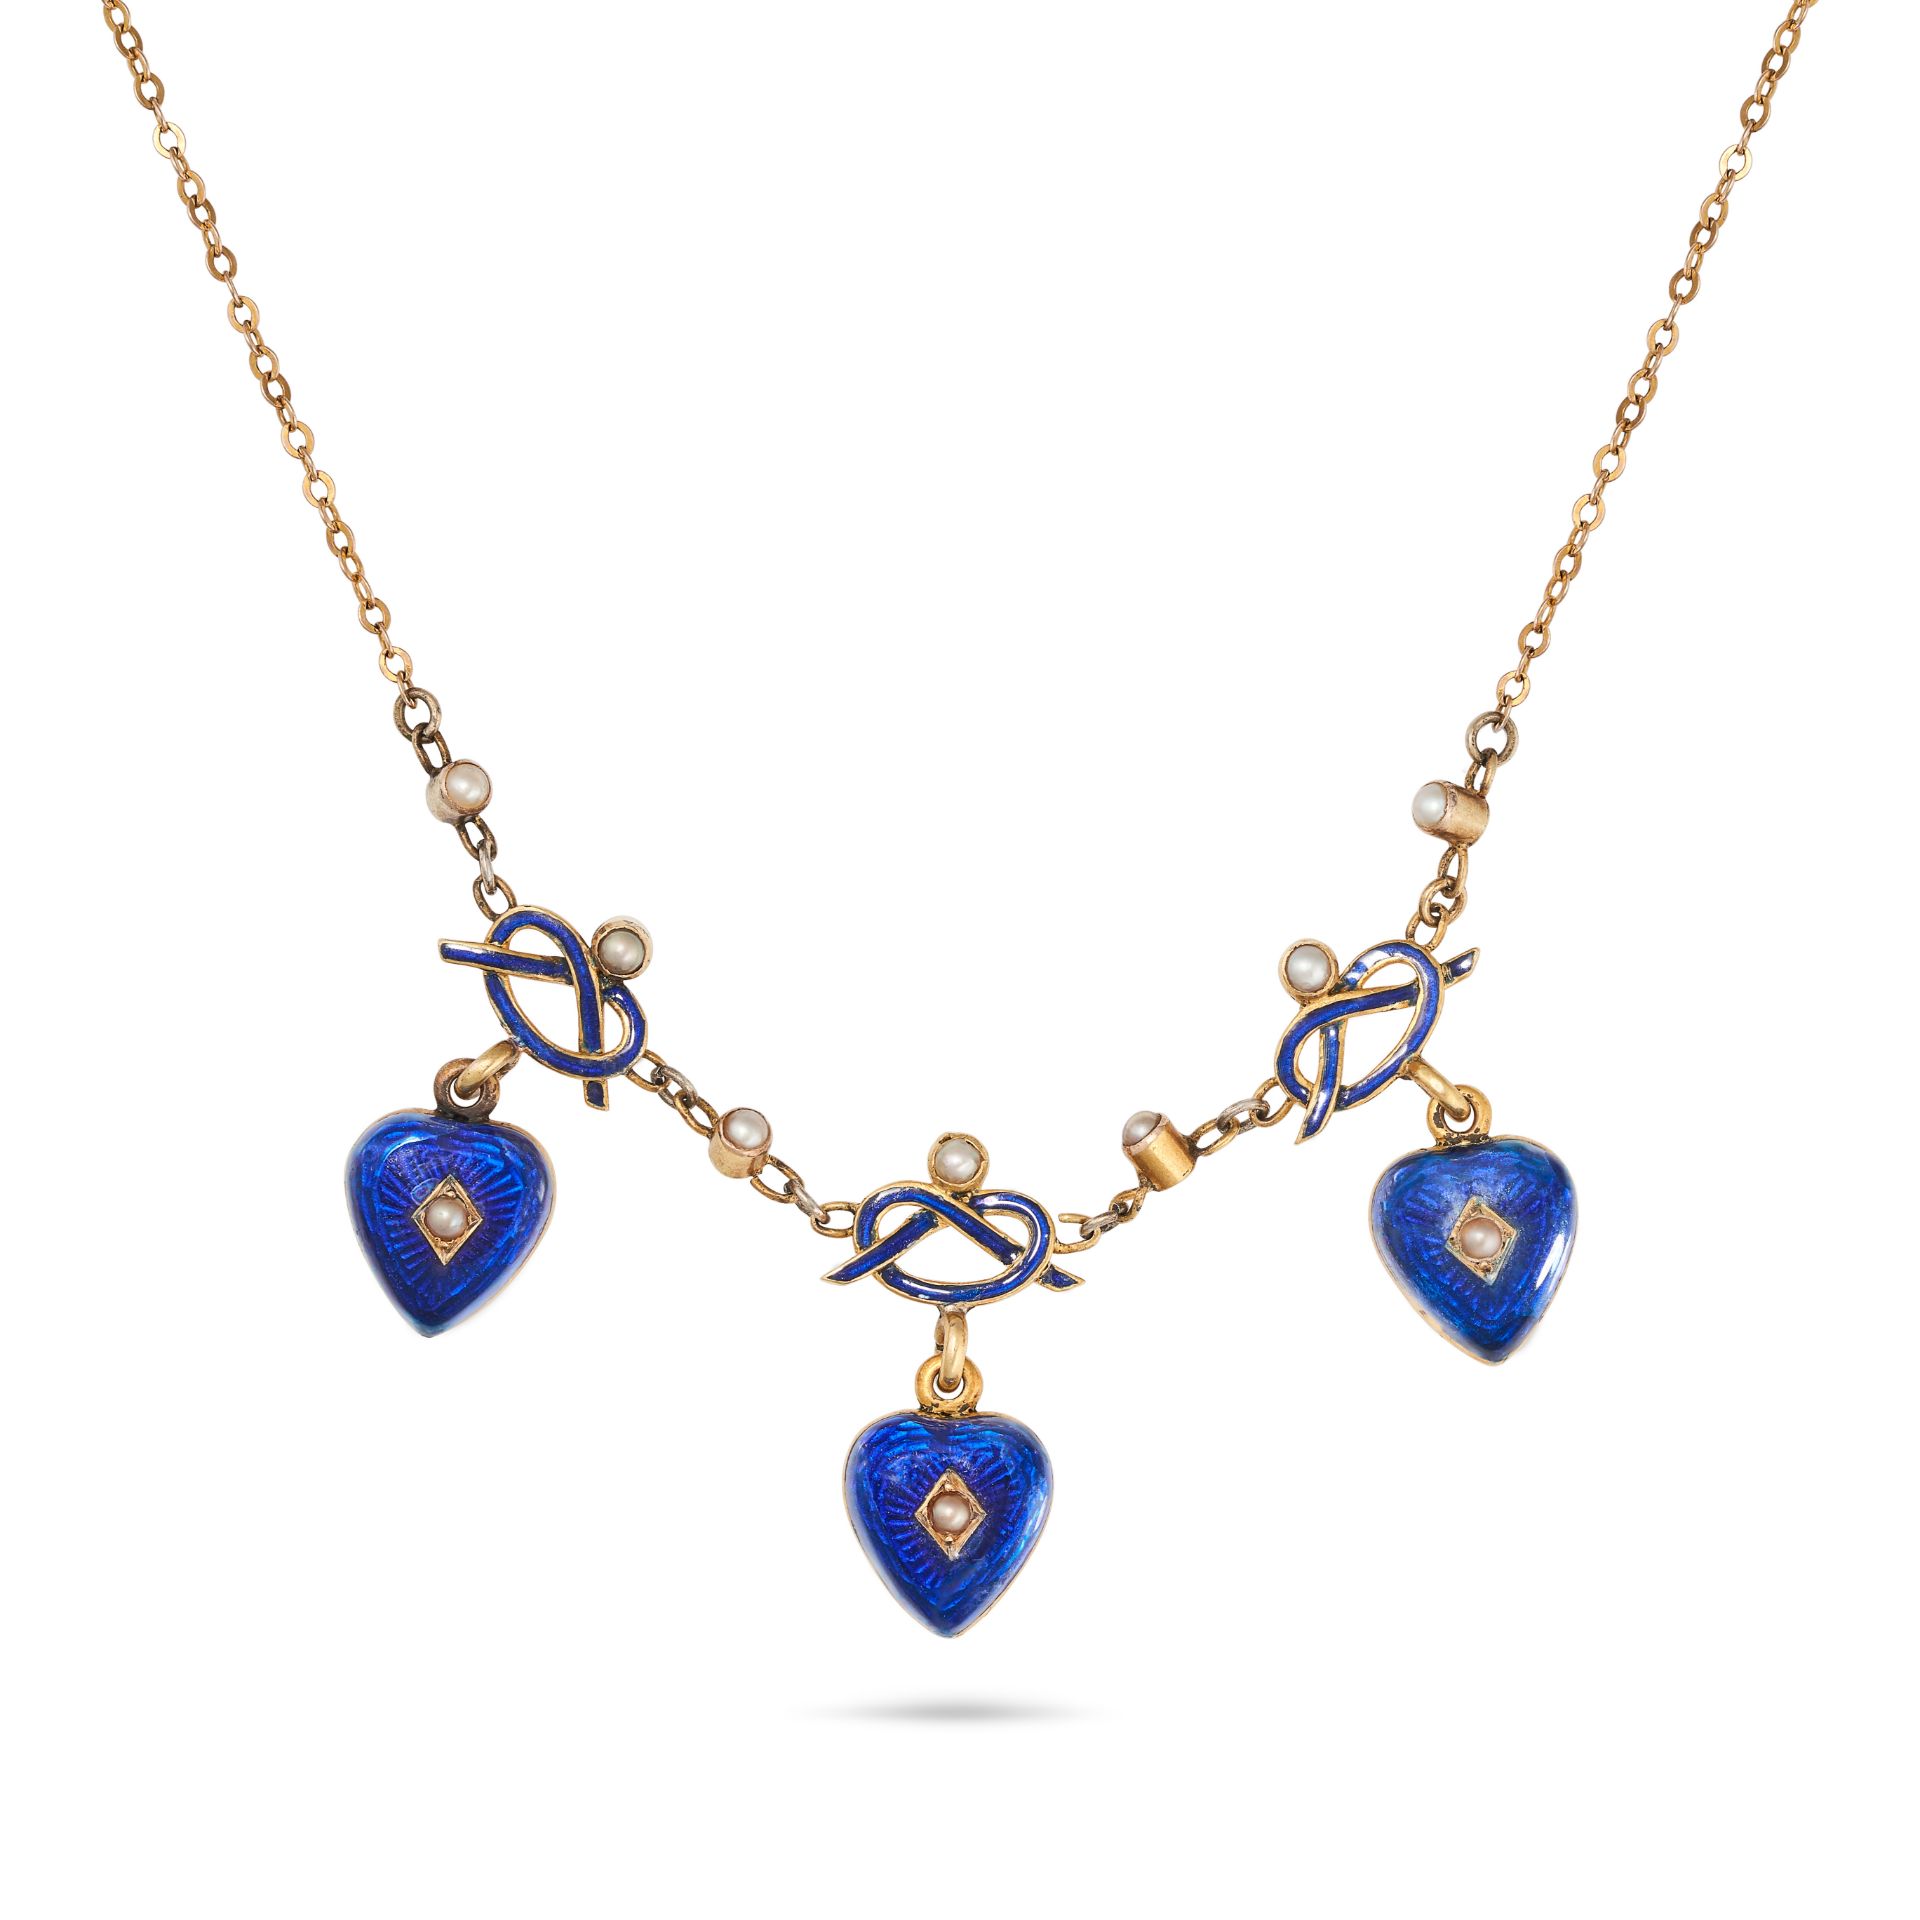 AN ANTIQUE PEARL AND ENAMEL LOVERS' KNOT NECKLACE comprising a trace chain set with three lovers'...